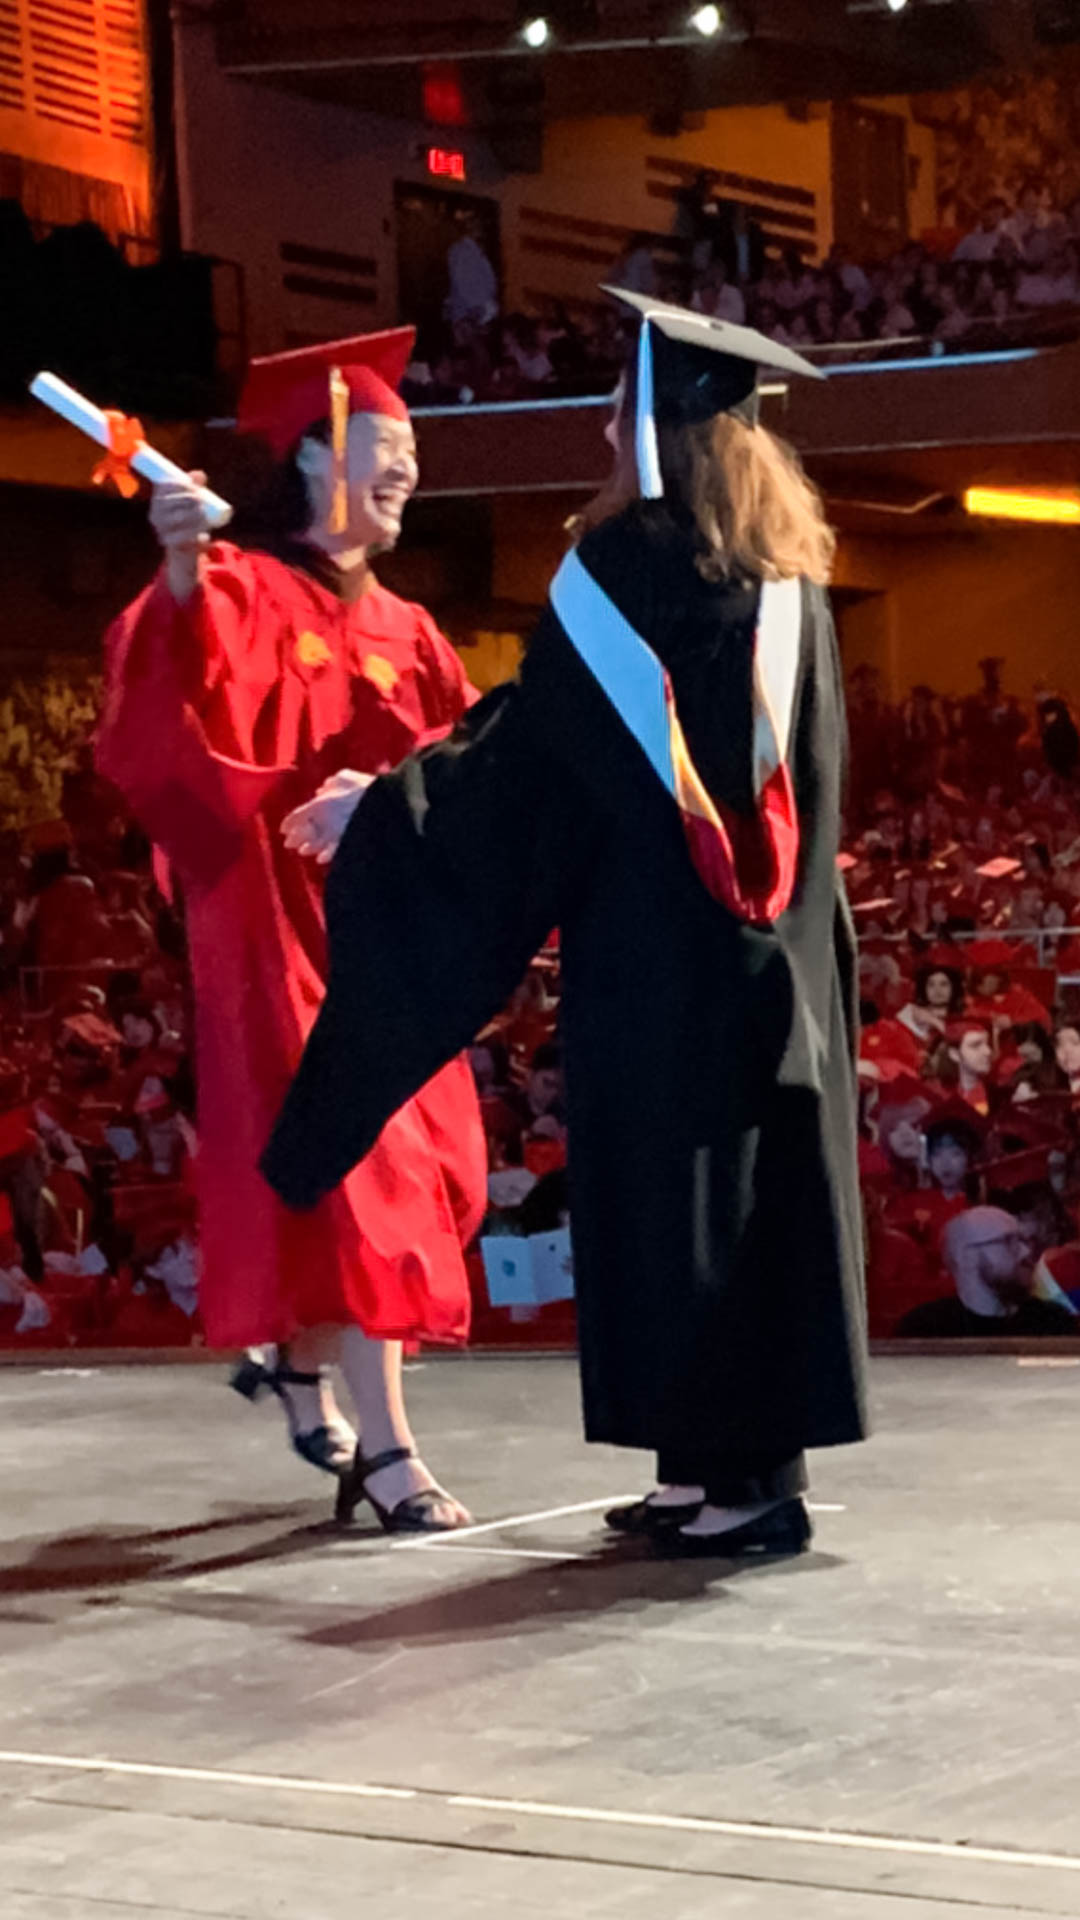 a student getting their diploma on stage